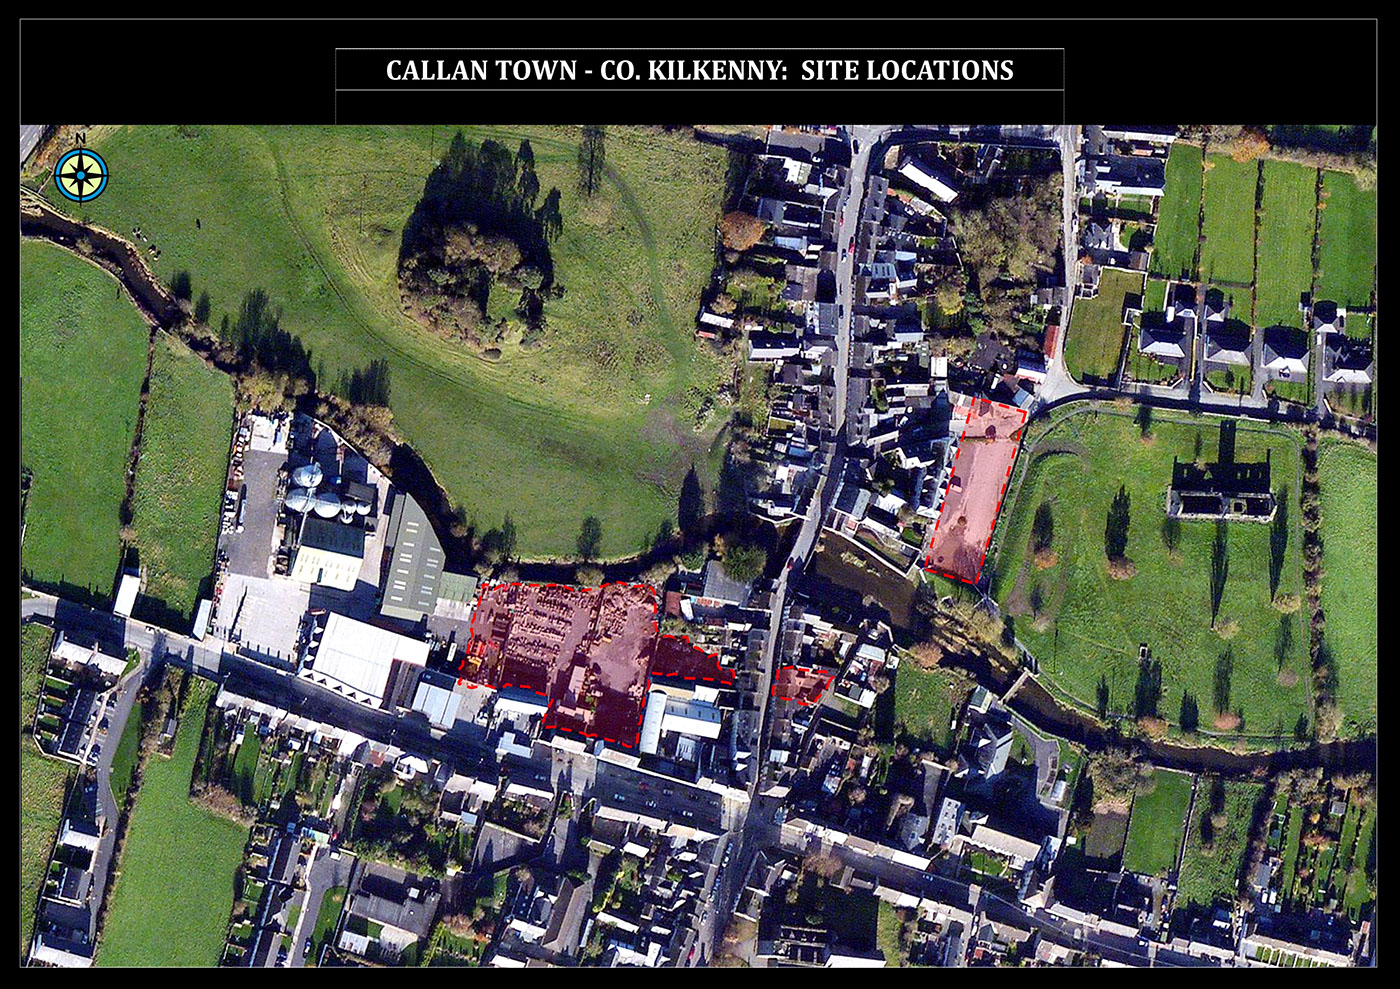 co-housing GIY Grow it Yourself callan Co. Kilkenny Rejuvenate landscaping abbey Friary meadow Flood Prevention community market Picnicking Pedestrianized Street